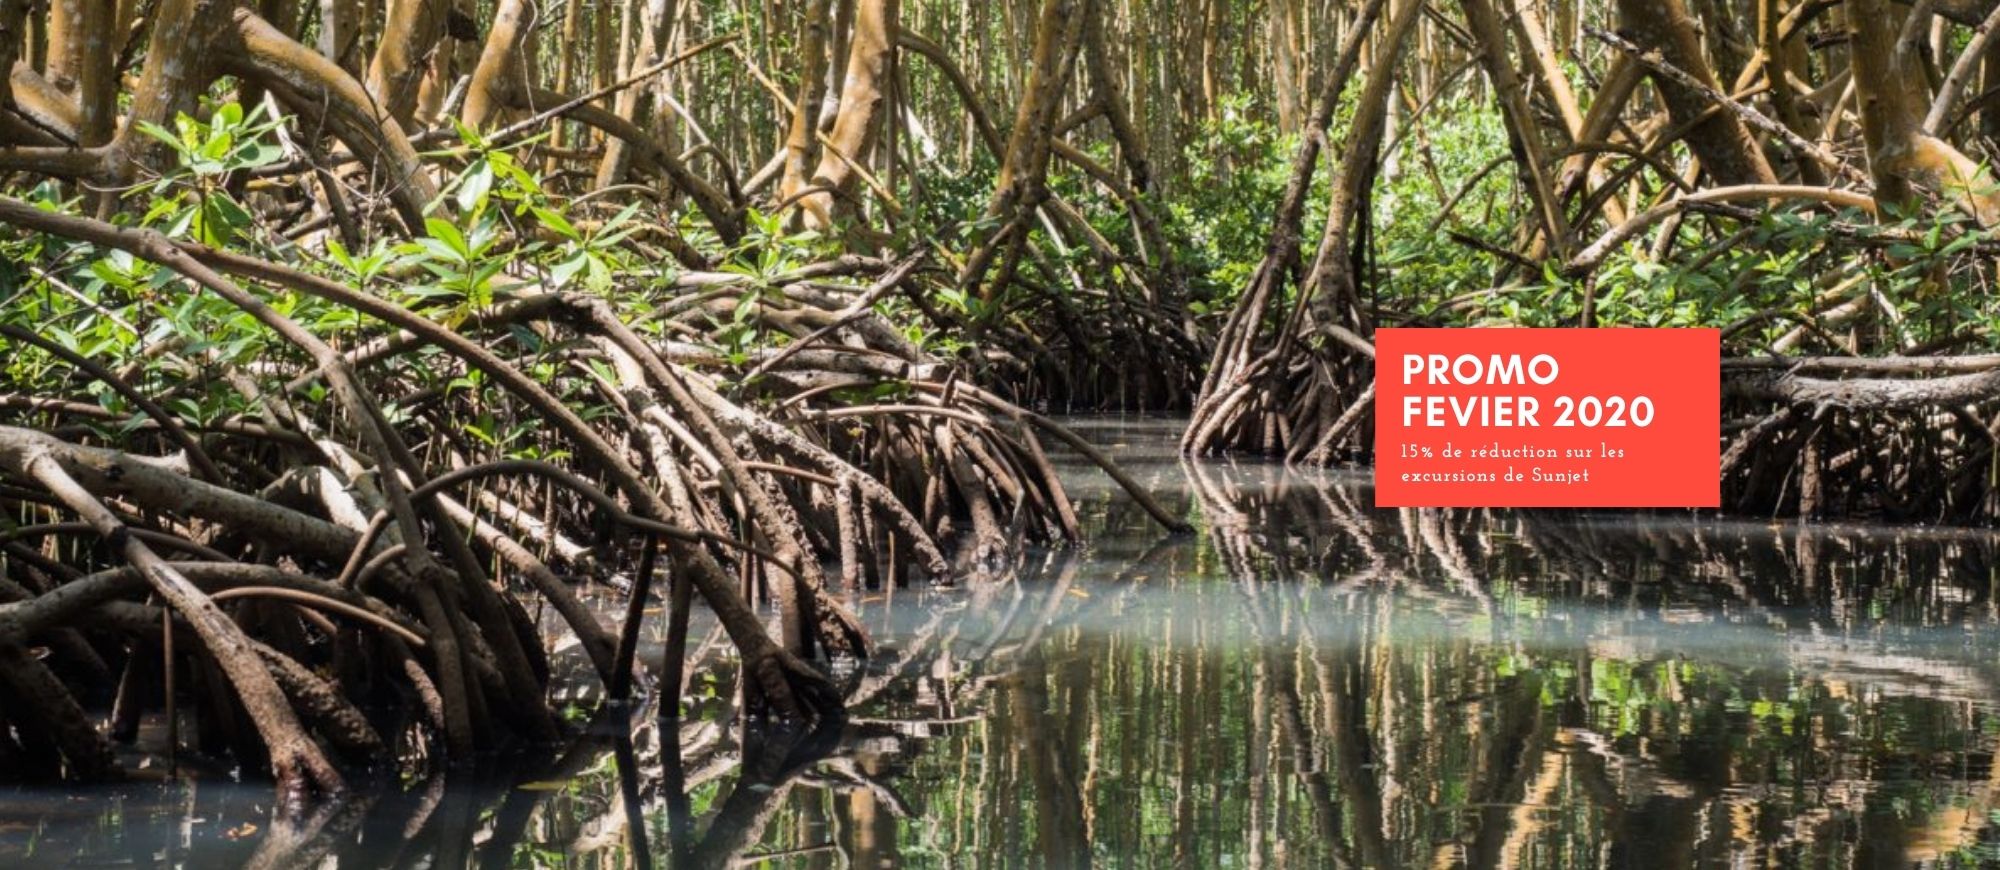 CISMAG Offer CISMAG - Discovery of the Old Fort Mangrove by Electric Boat or Pedal Boat